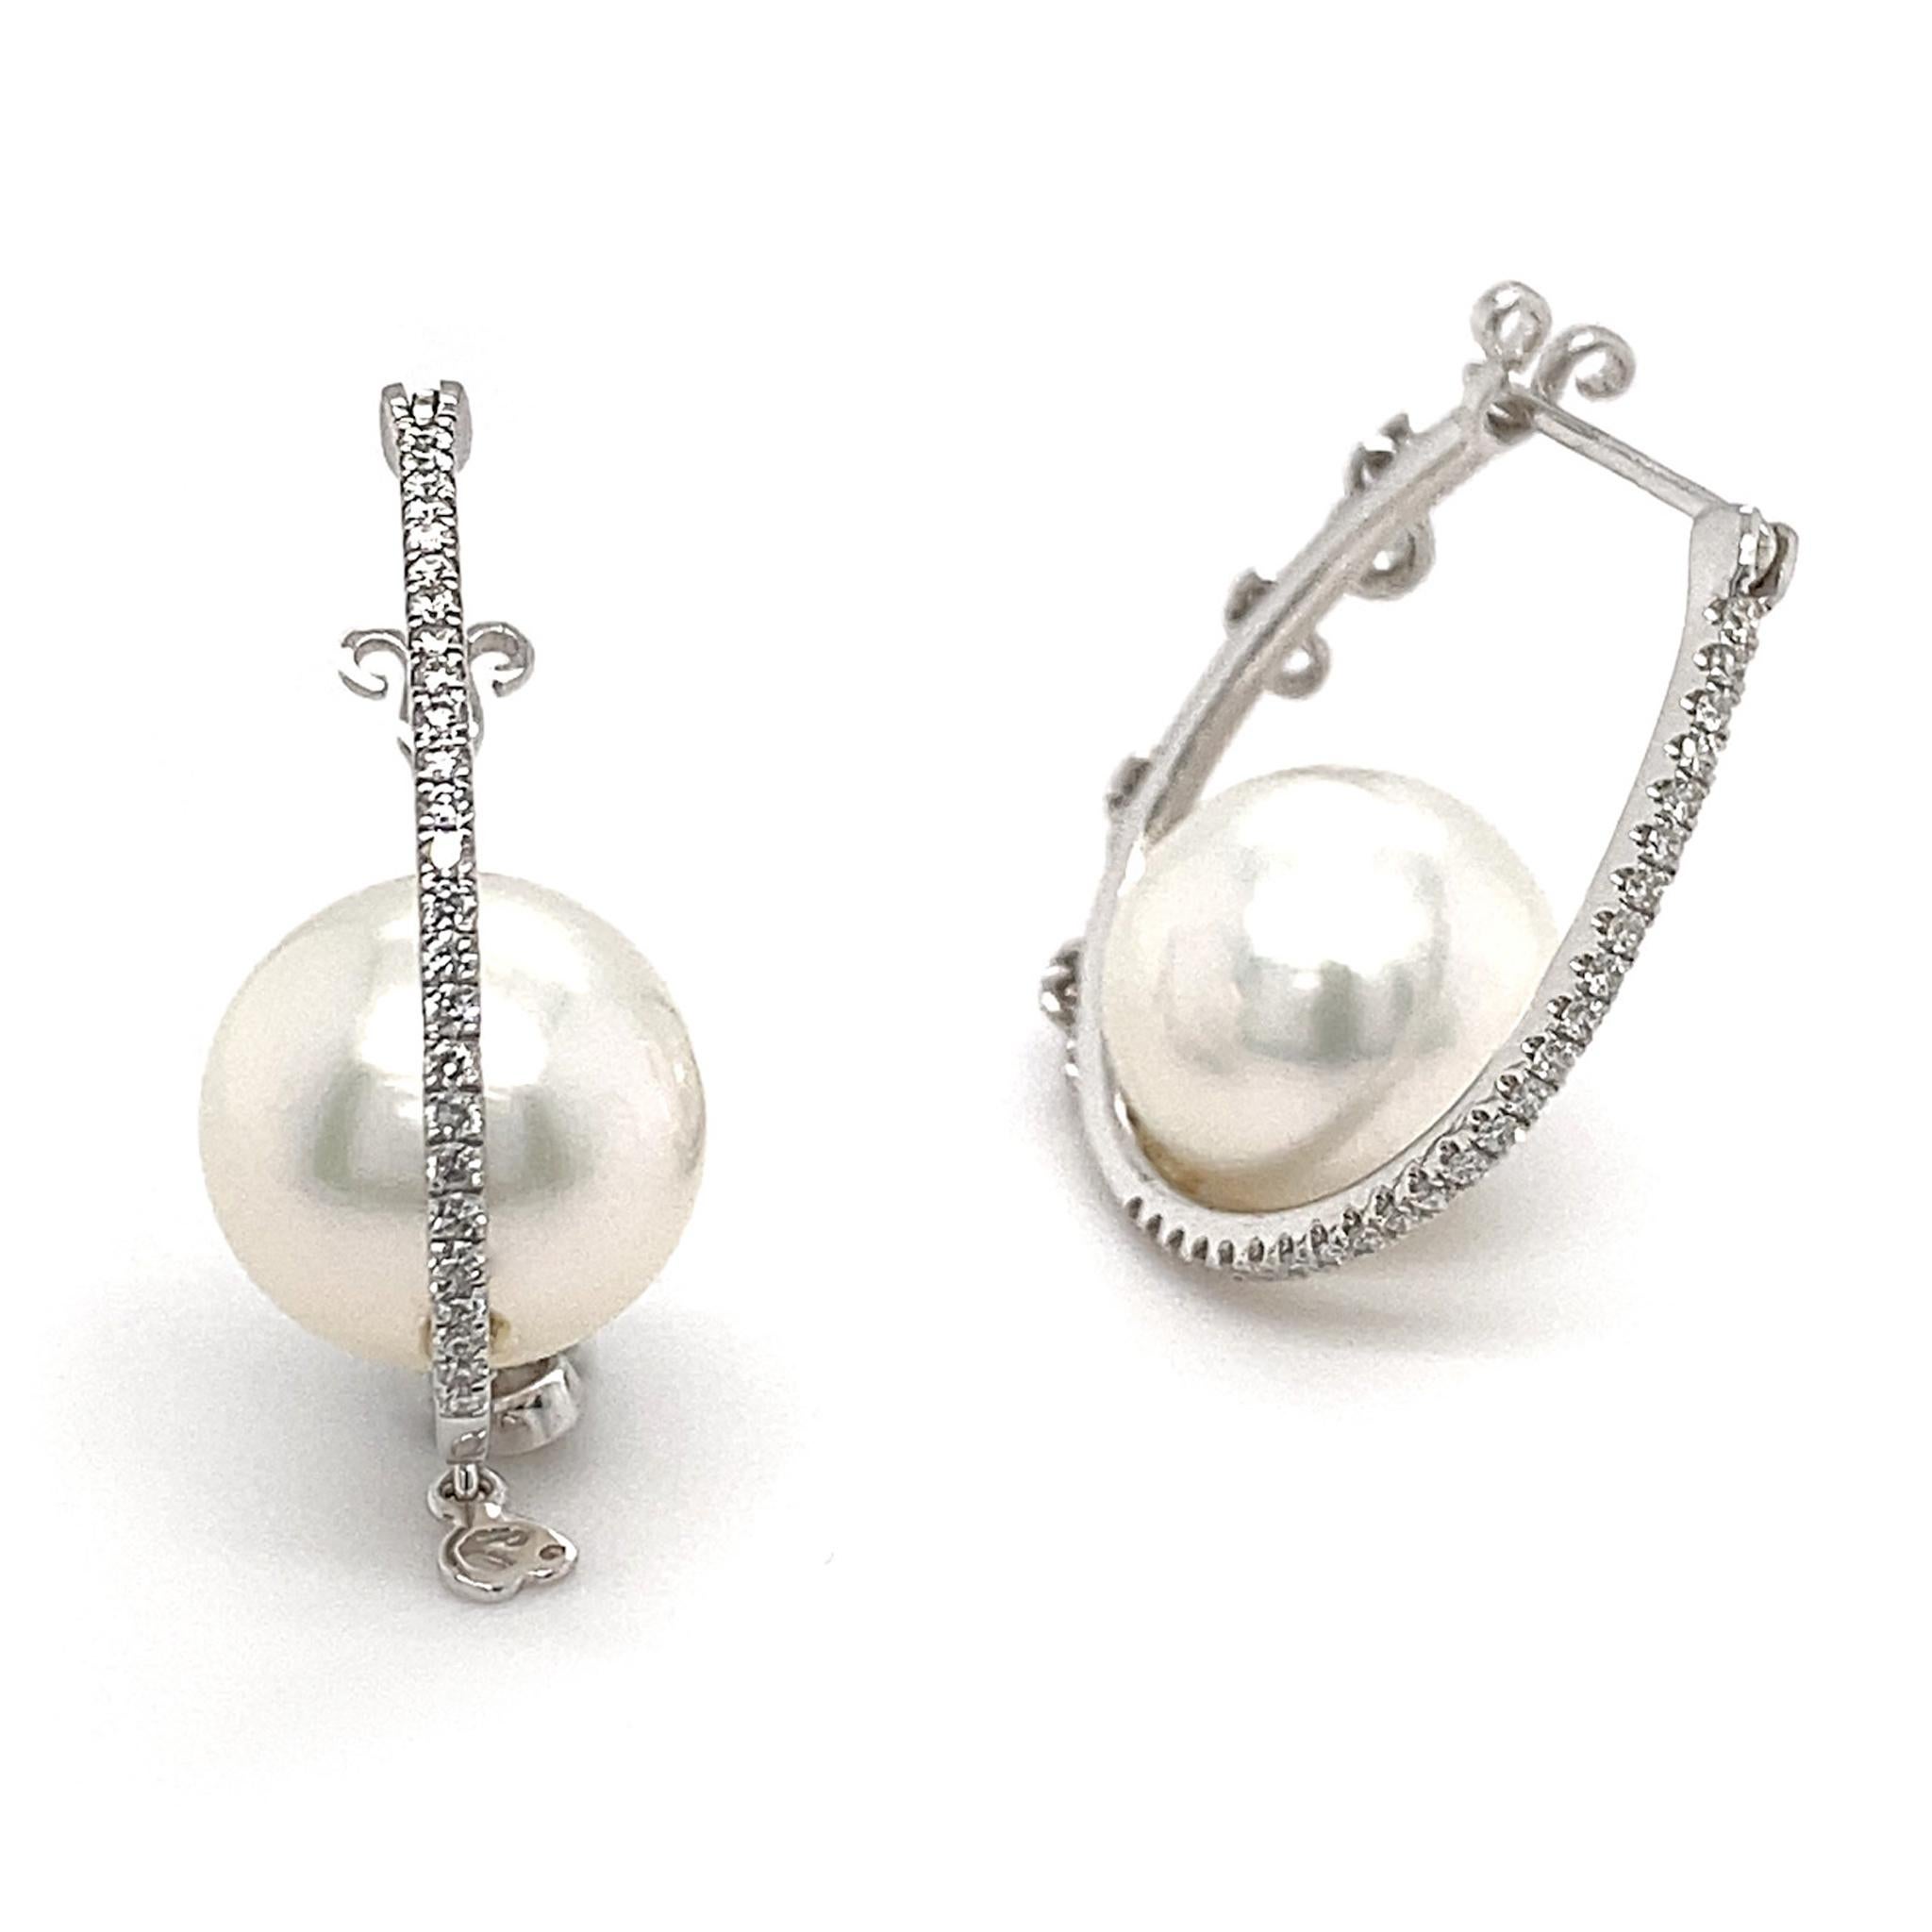 This fun pair of pearl-bijouxed hoops are crafted with the same sophistication as the rest of Dilys’ fine jewellery collection. Anchored by a pair of lustrous South Sea Pearls (totalling 18.70ct; 11.10 x 11.20 + 11 x 11.10mm), these slender